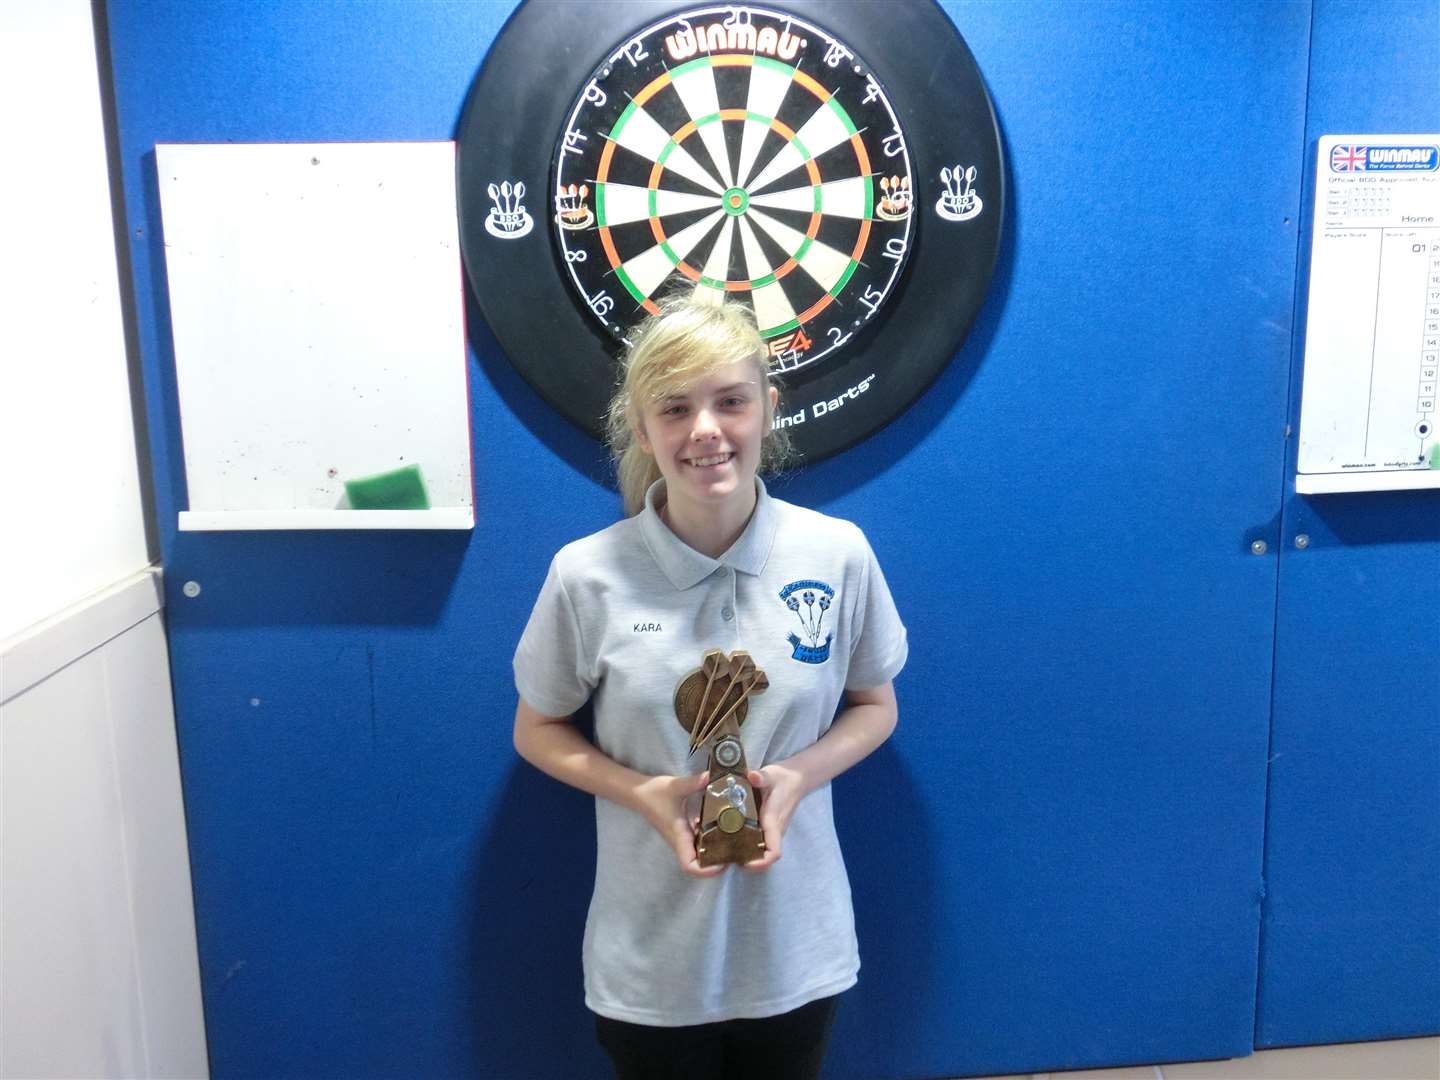 Kara Sutherland pictured with her trophy after winning the Glenrothes Open and qualifying for the World Masters.